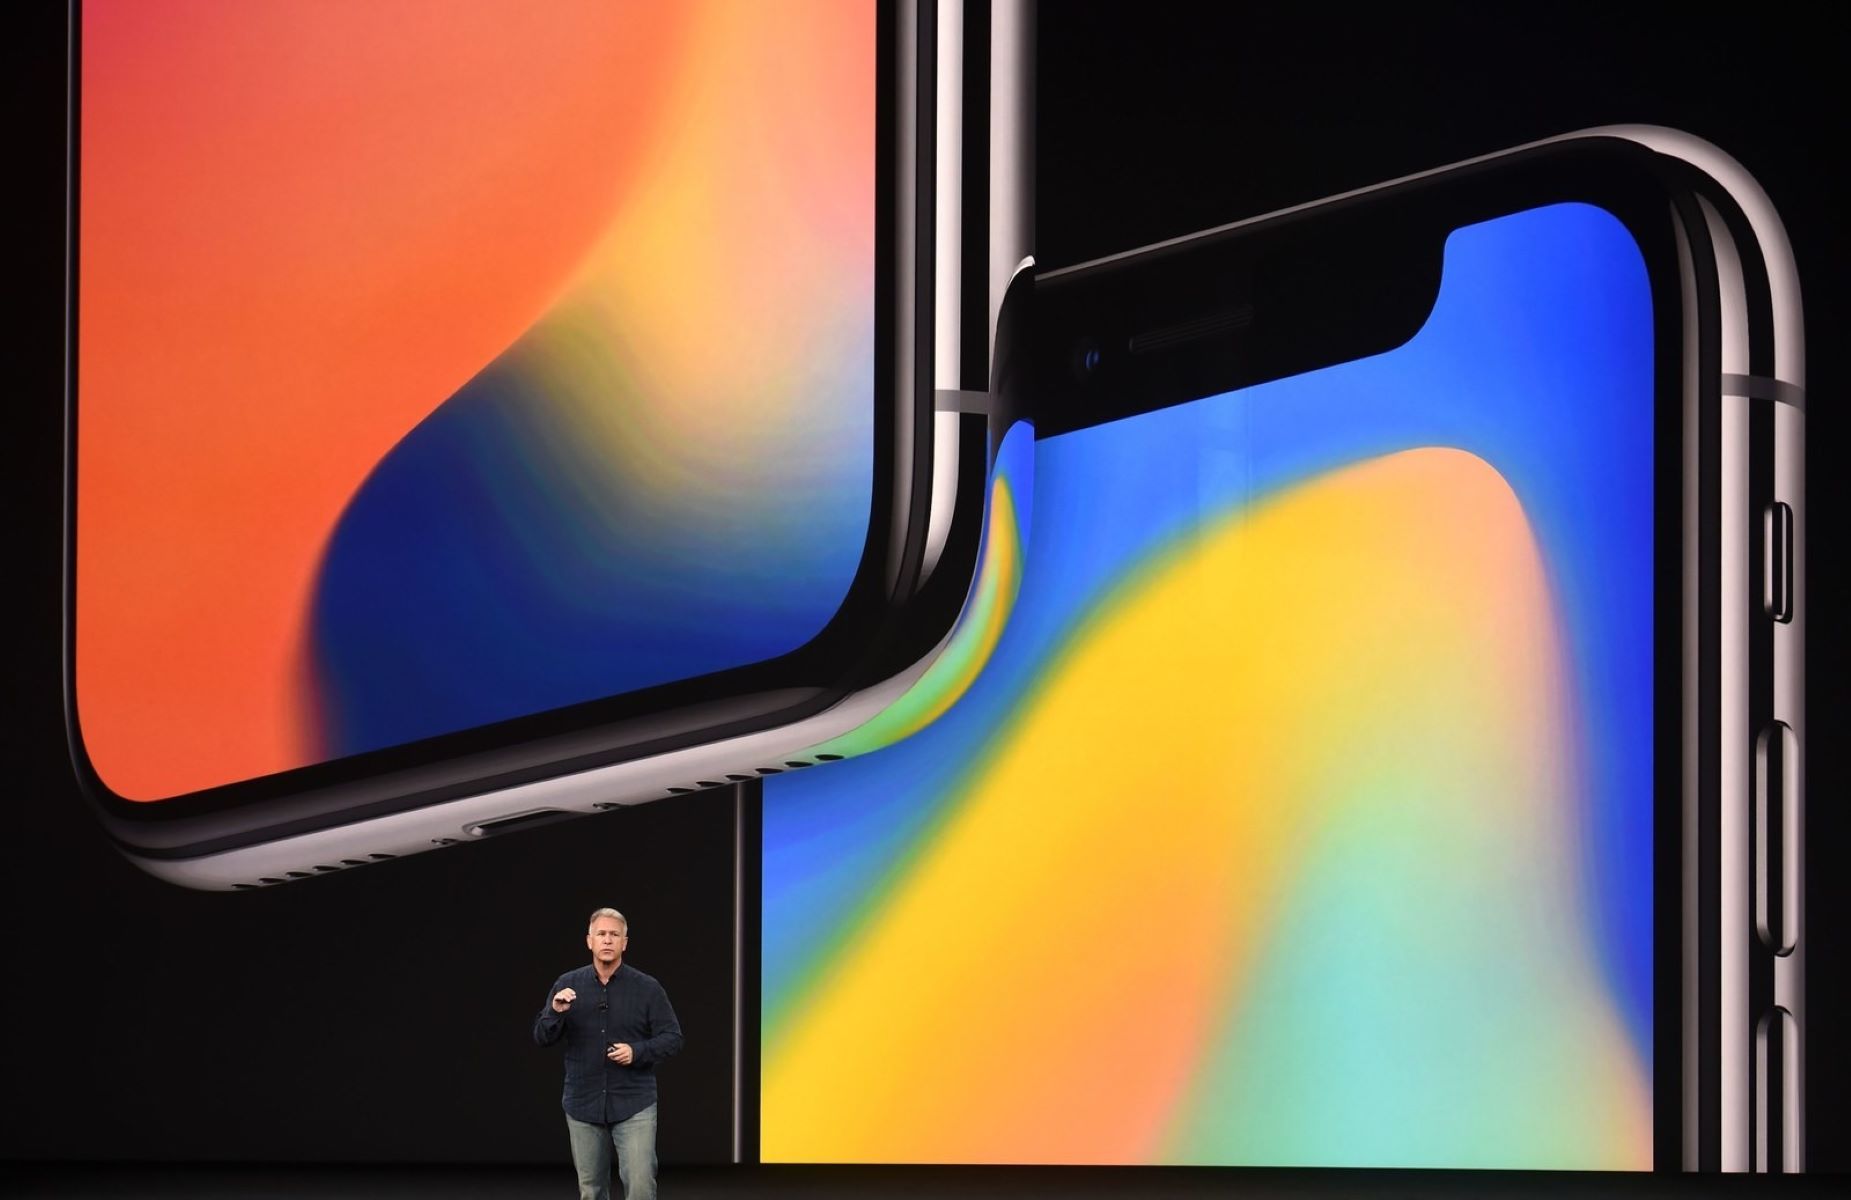 Keynote Viewing: Finding Where To Watch IPhone 10 XS Keynote